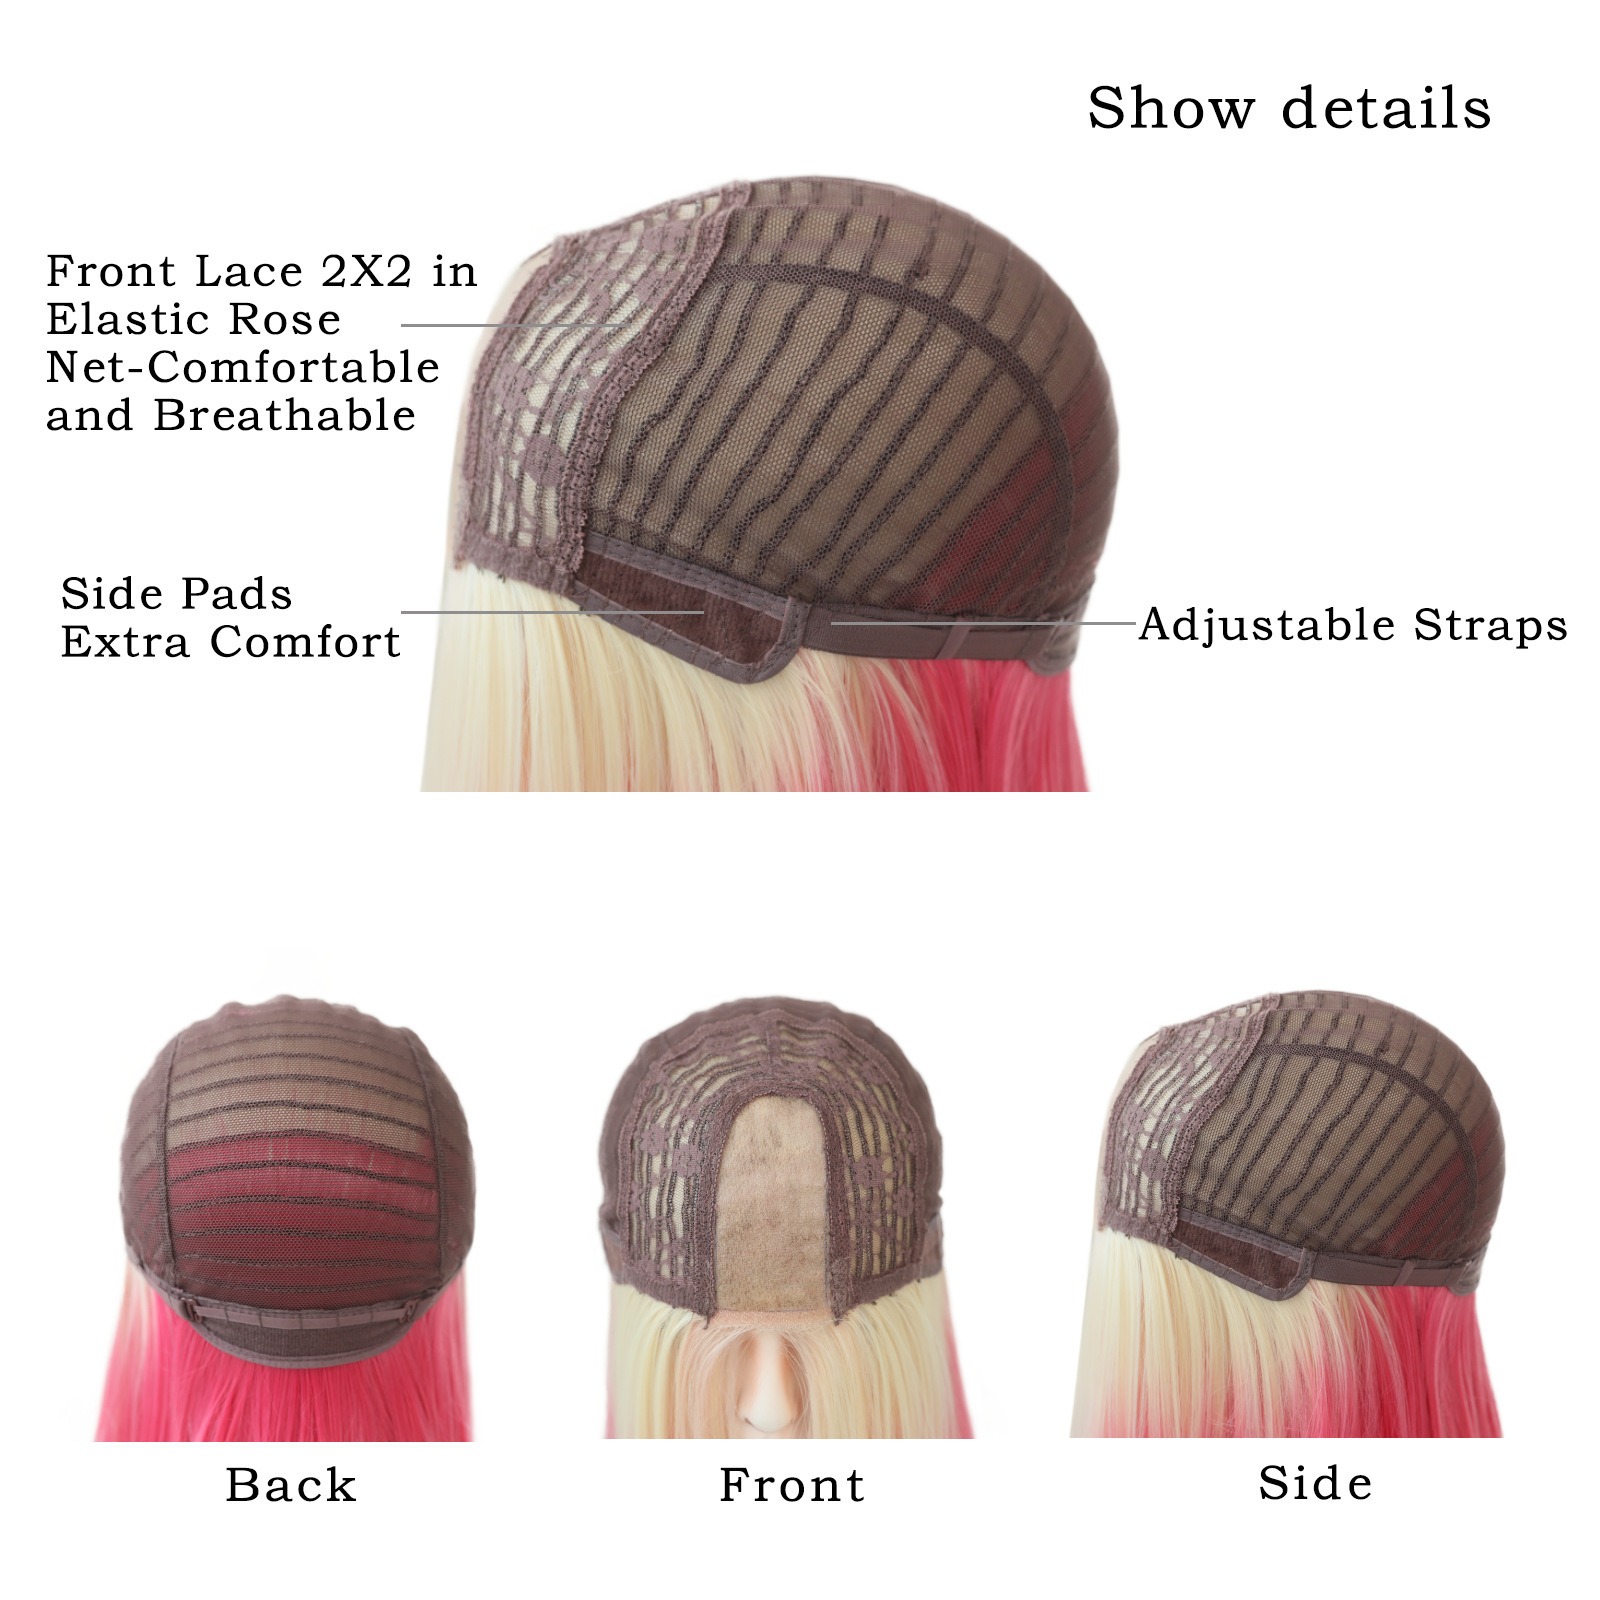 et of wig caps in various colors for versatile wig styling